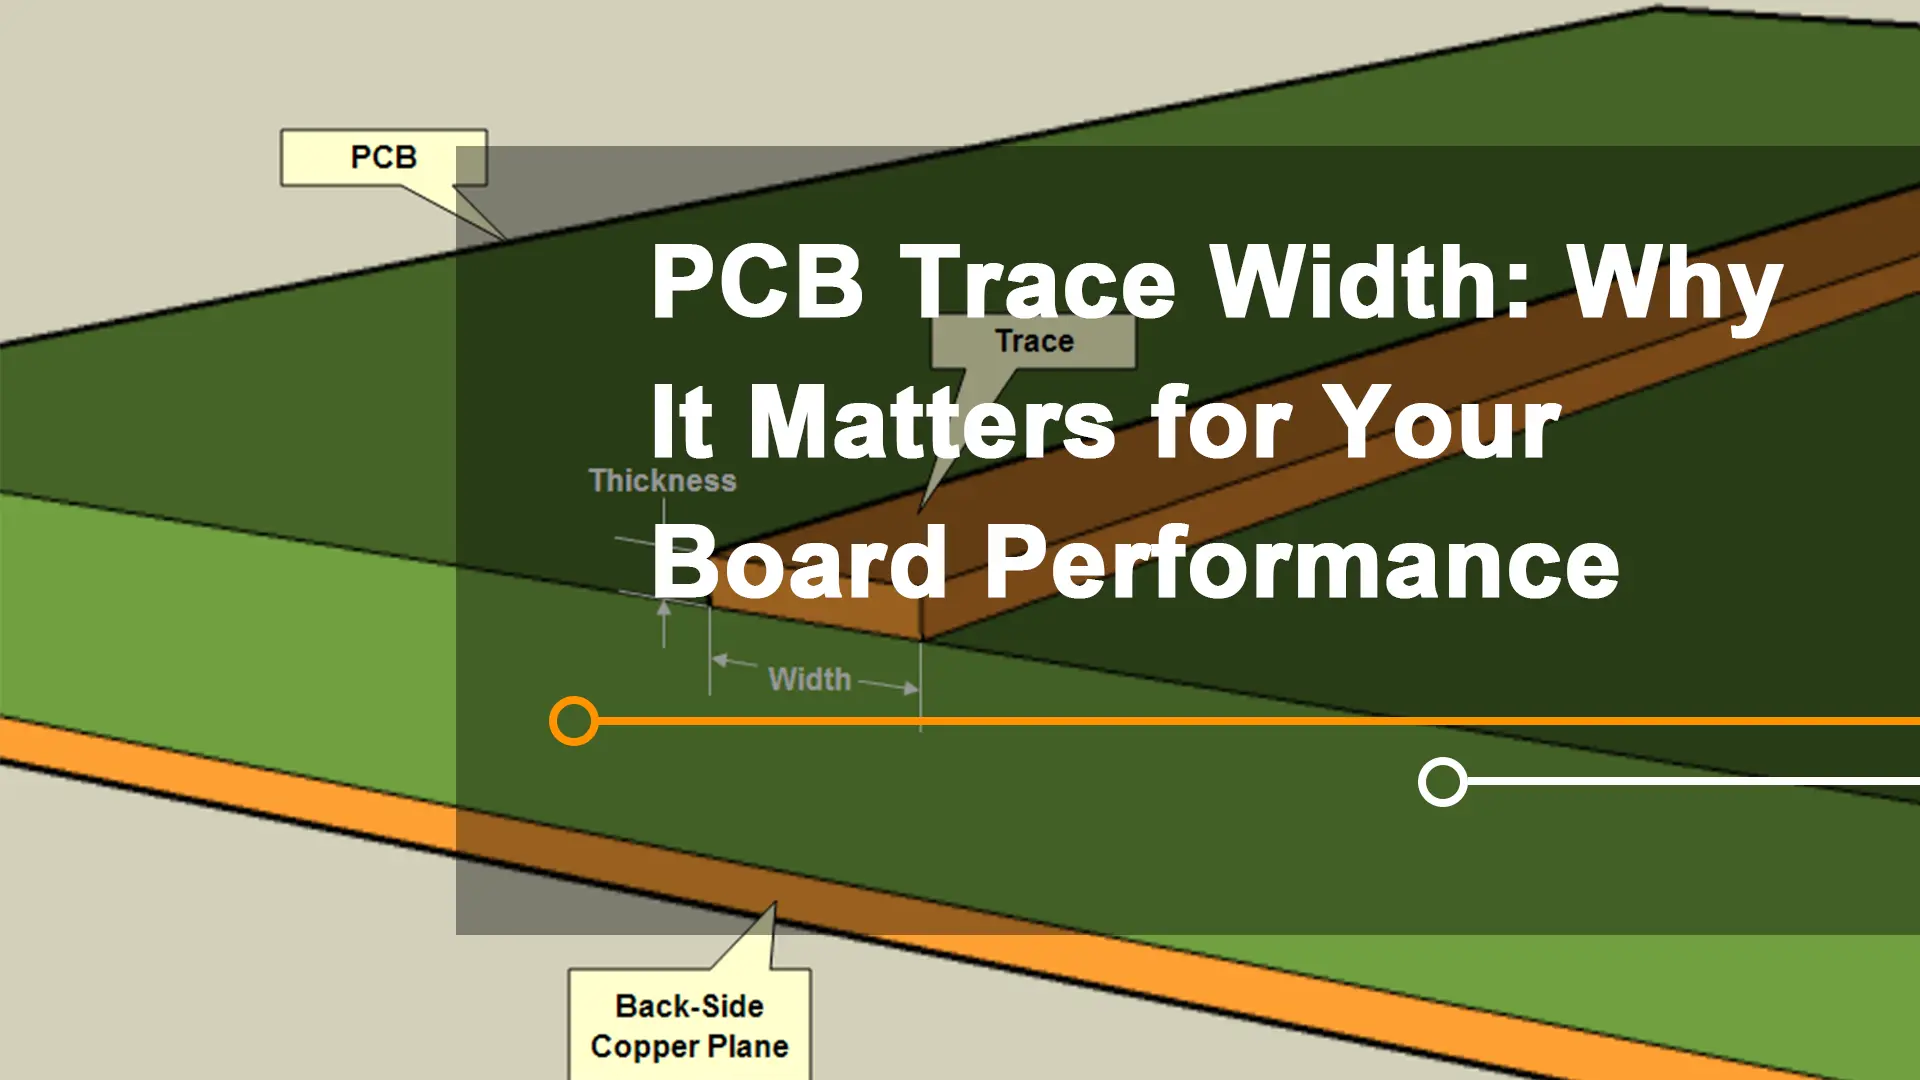 PCB Trace Width: Why It Matters for Your Board Performance